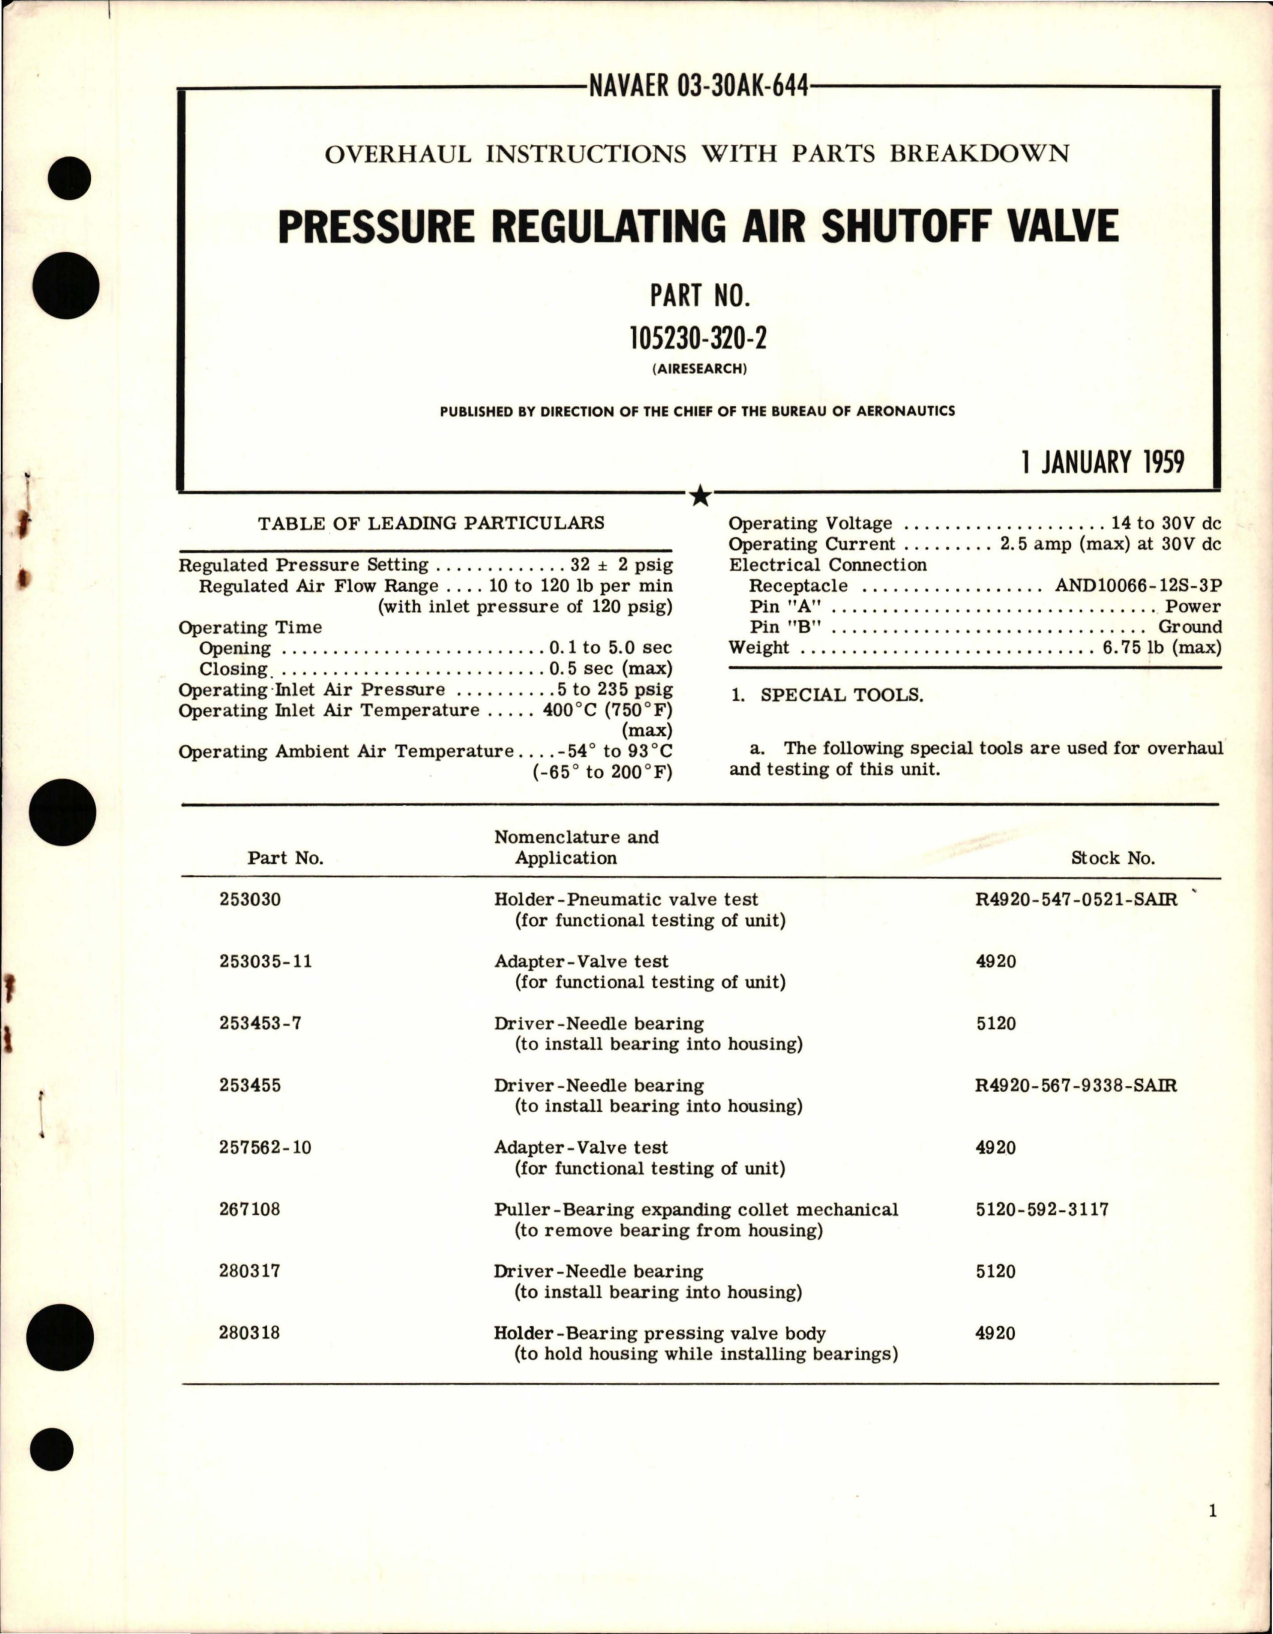 Sample page 1 from AirCorps Library document: Overhaul Instructions with Parts Breakdown for Pressure Regulating Air Shutoff Valve - Part 105230-320-2 